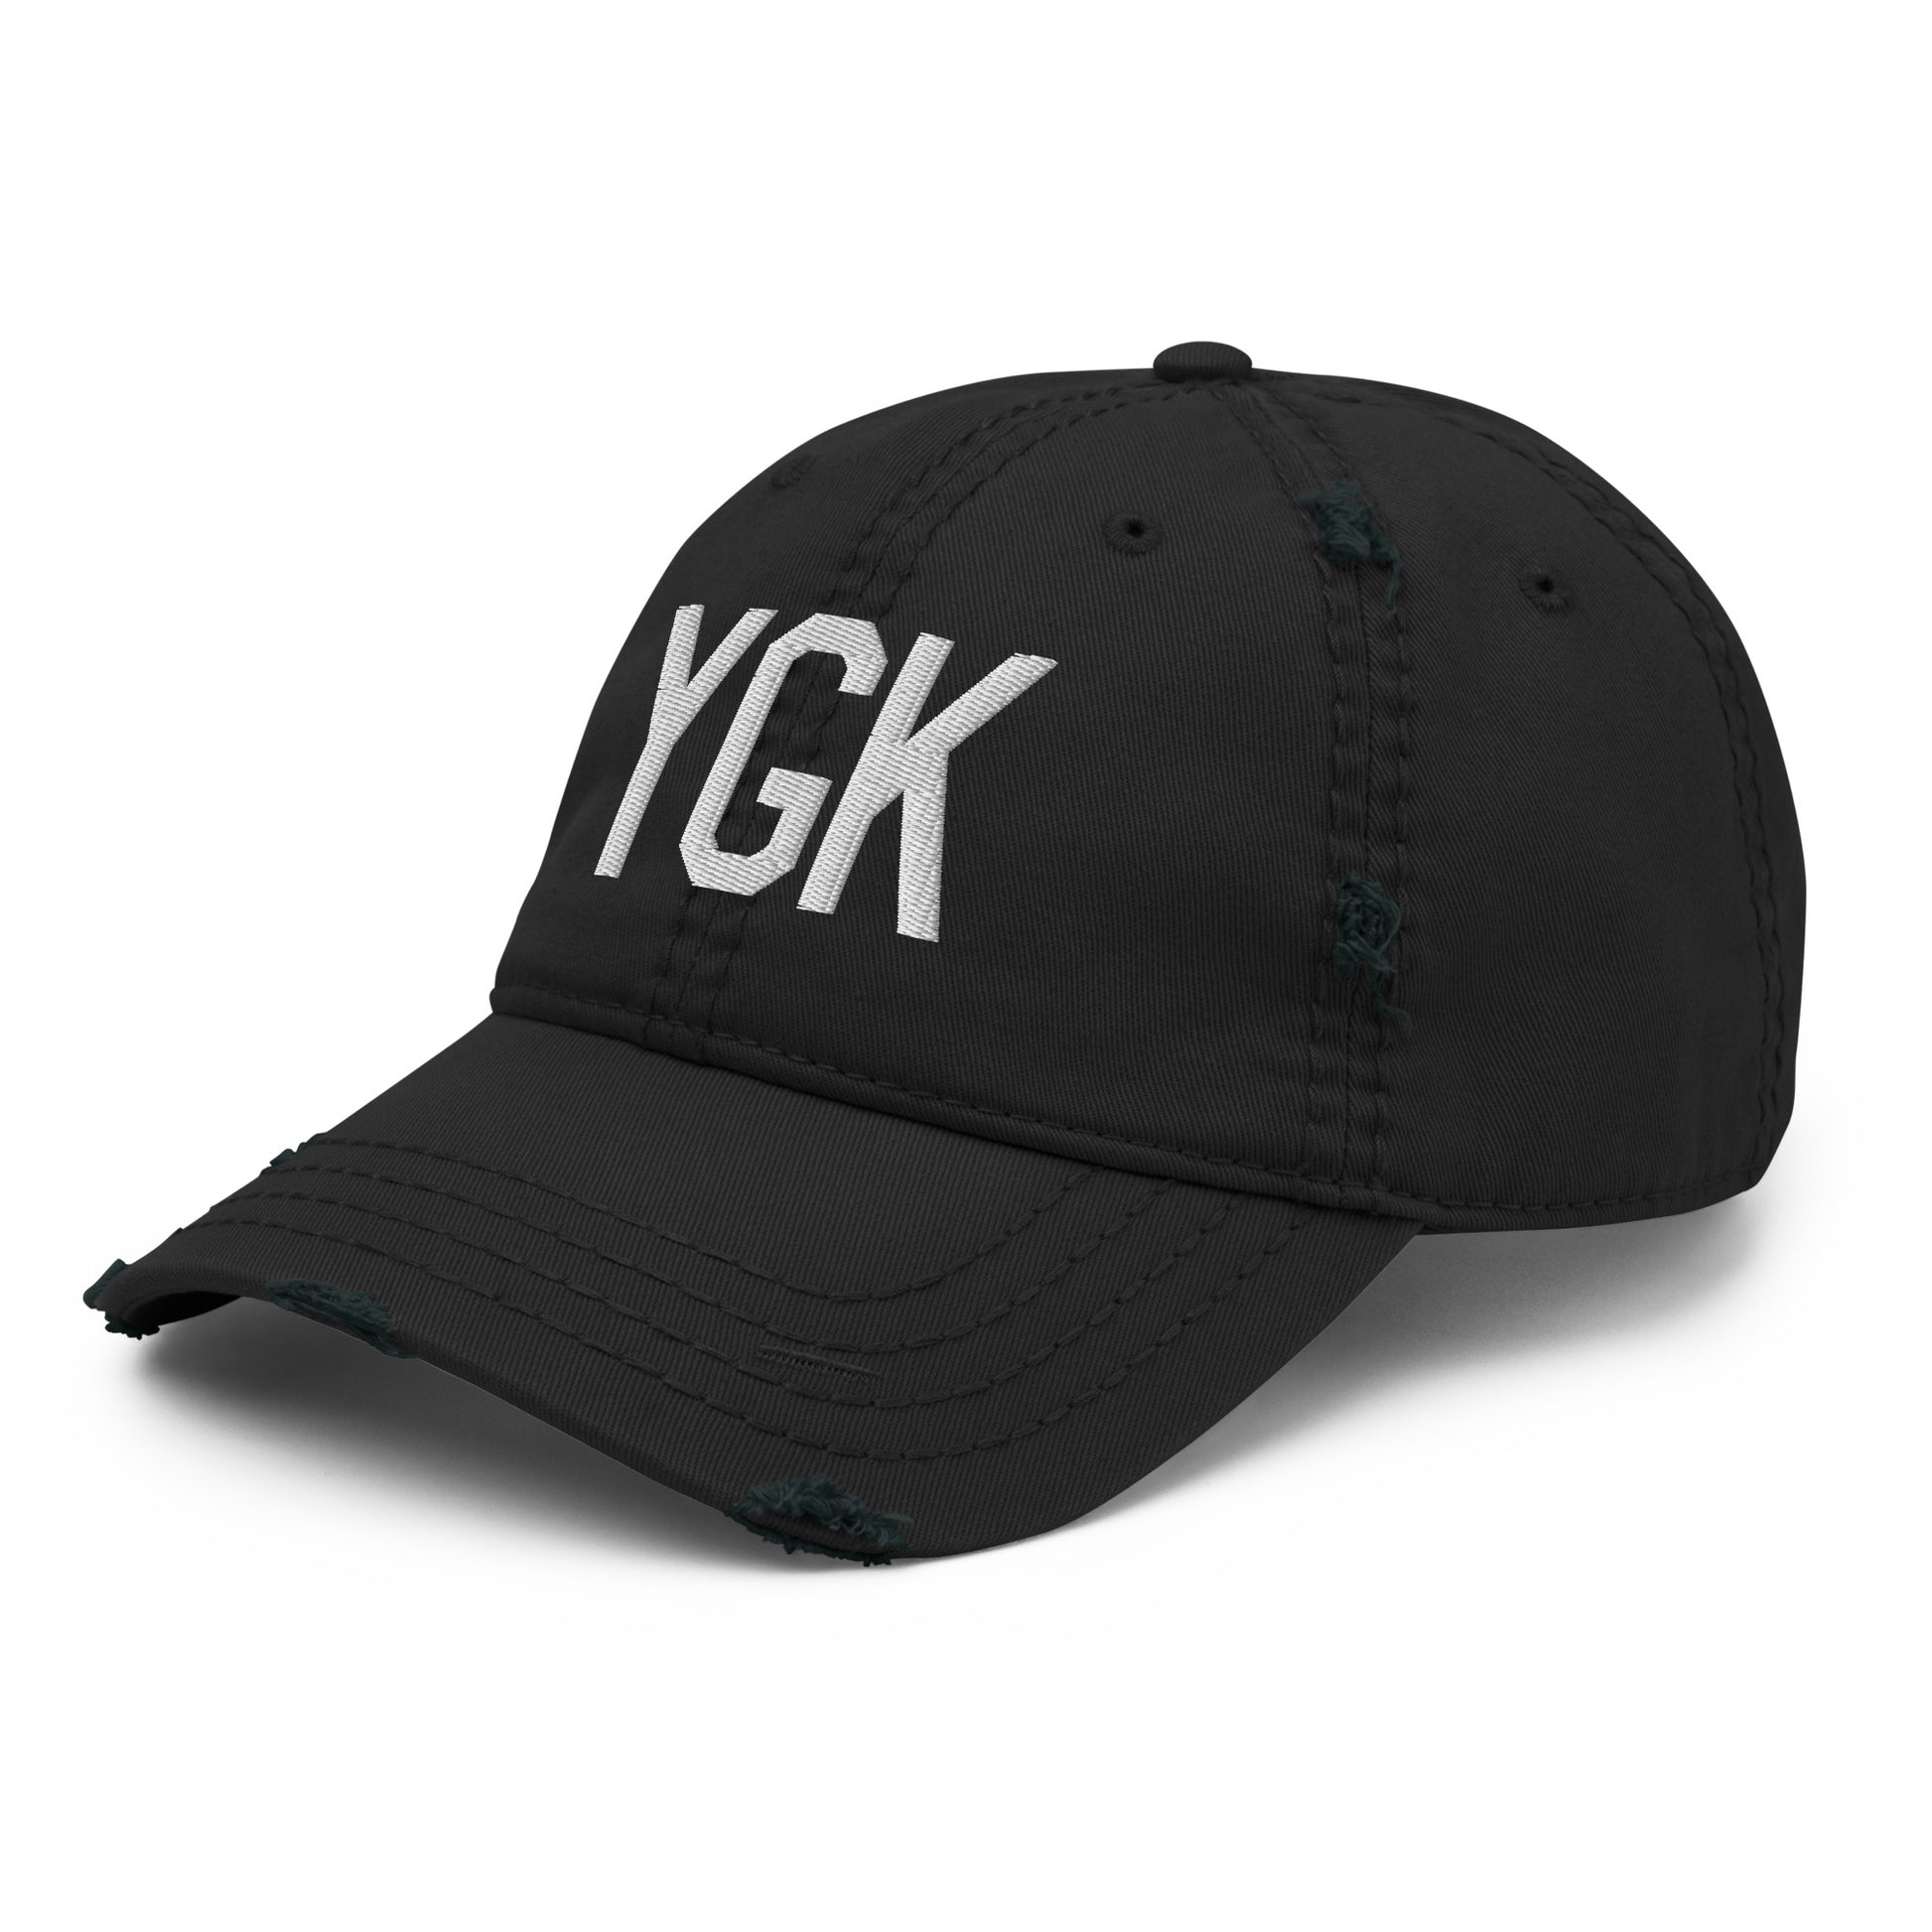 Airport Code Distressed Hat - White • YGK Kingston • YHM Designs - Image 11